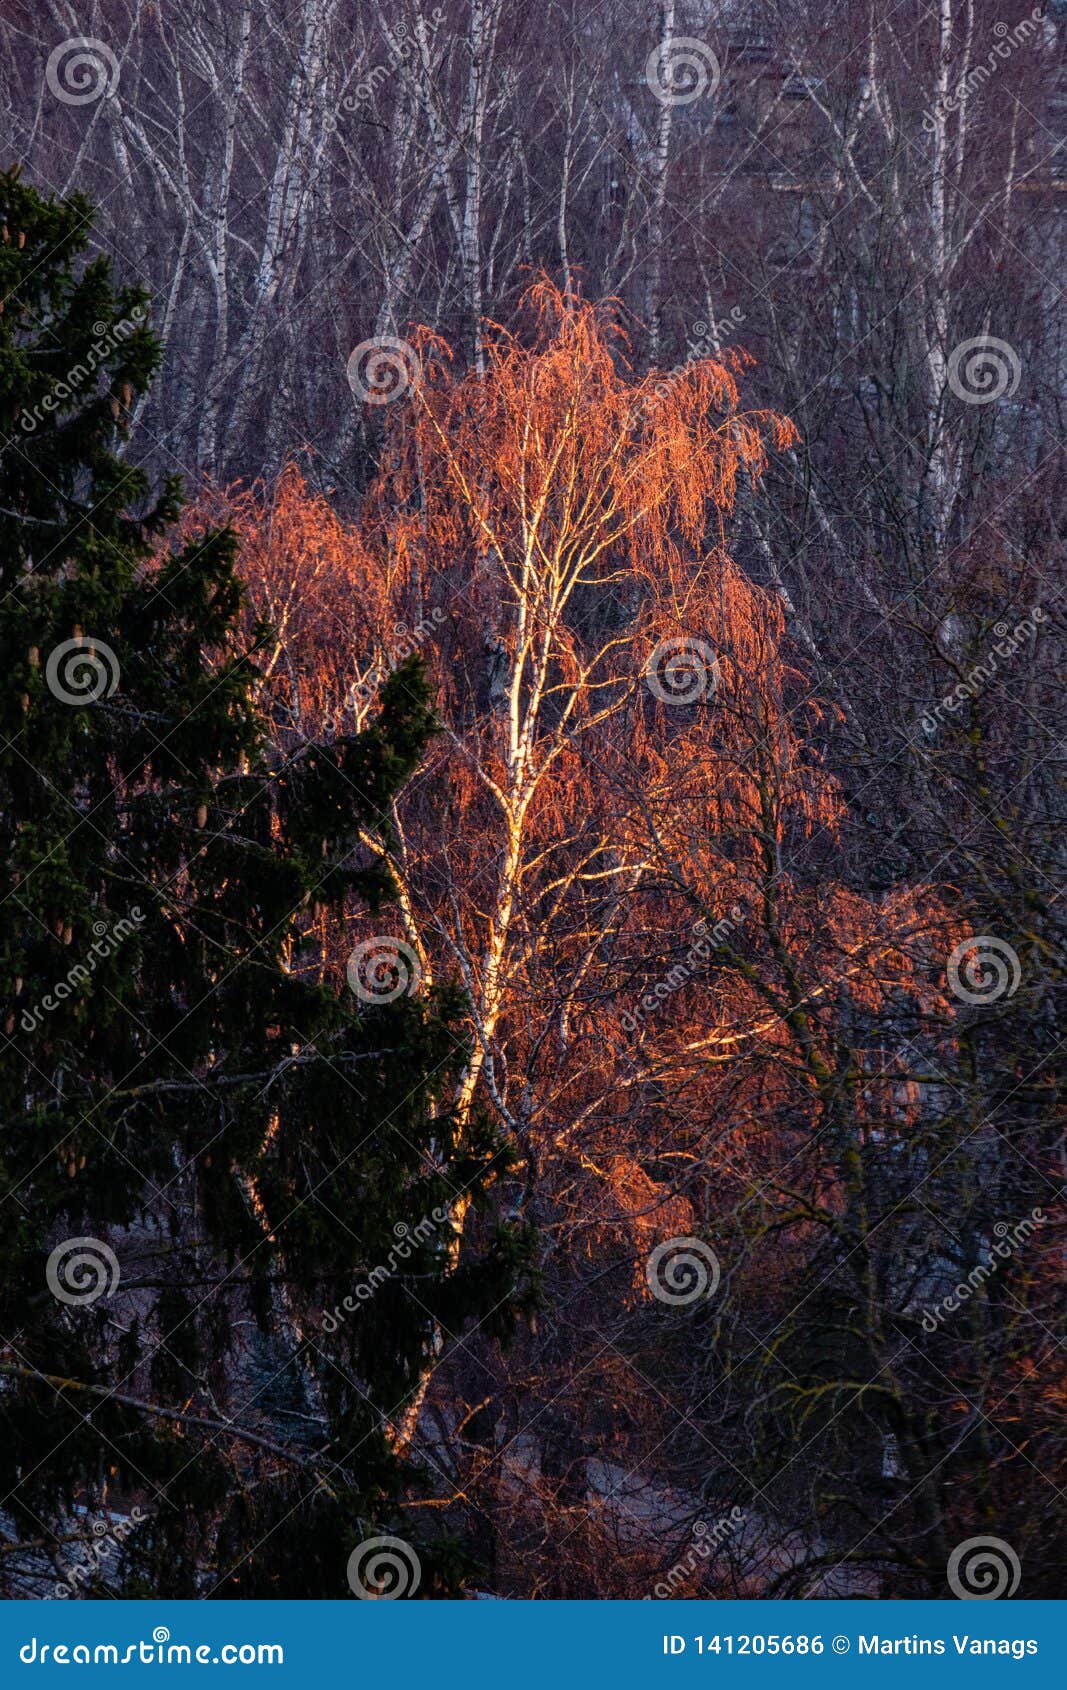 Naked Birch In Winter Against The Background Of Blue Sky 